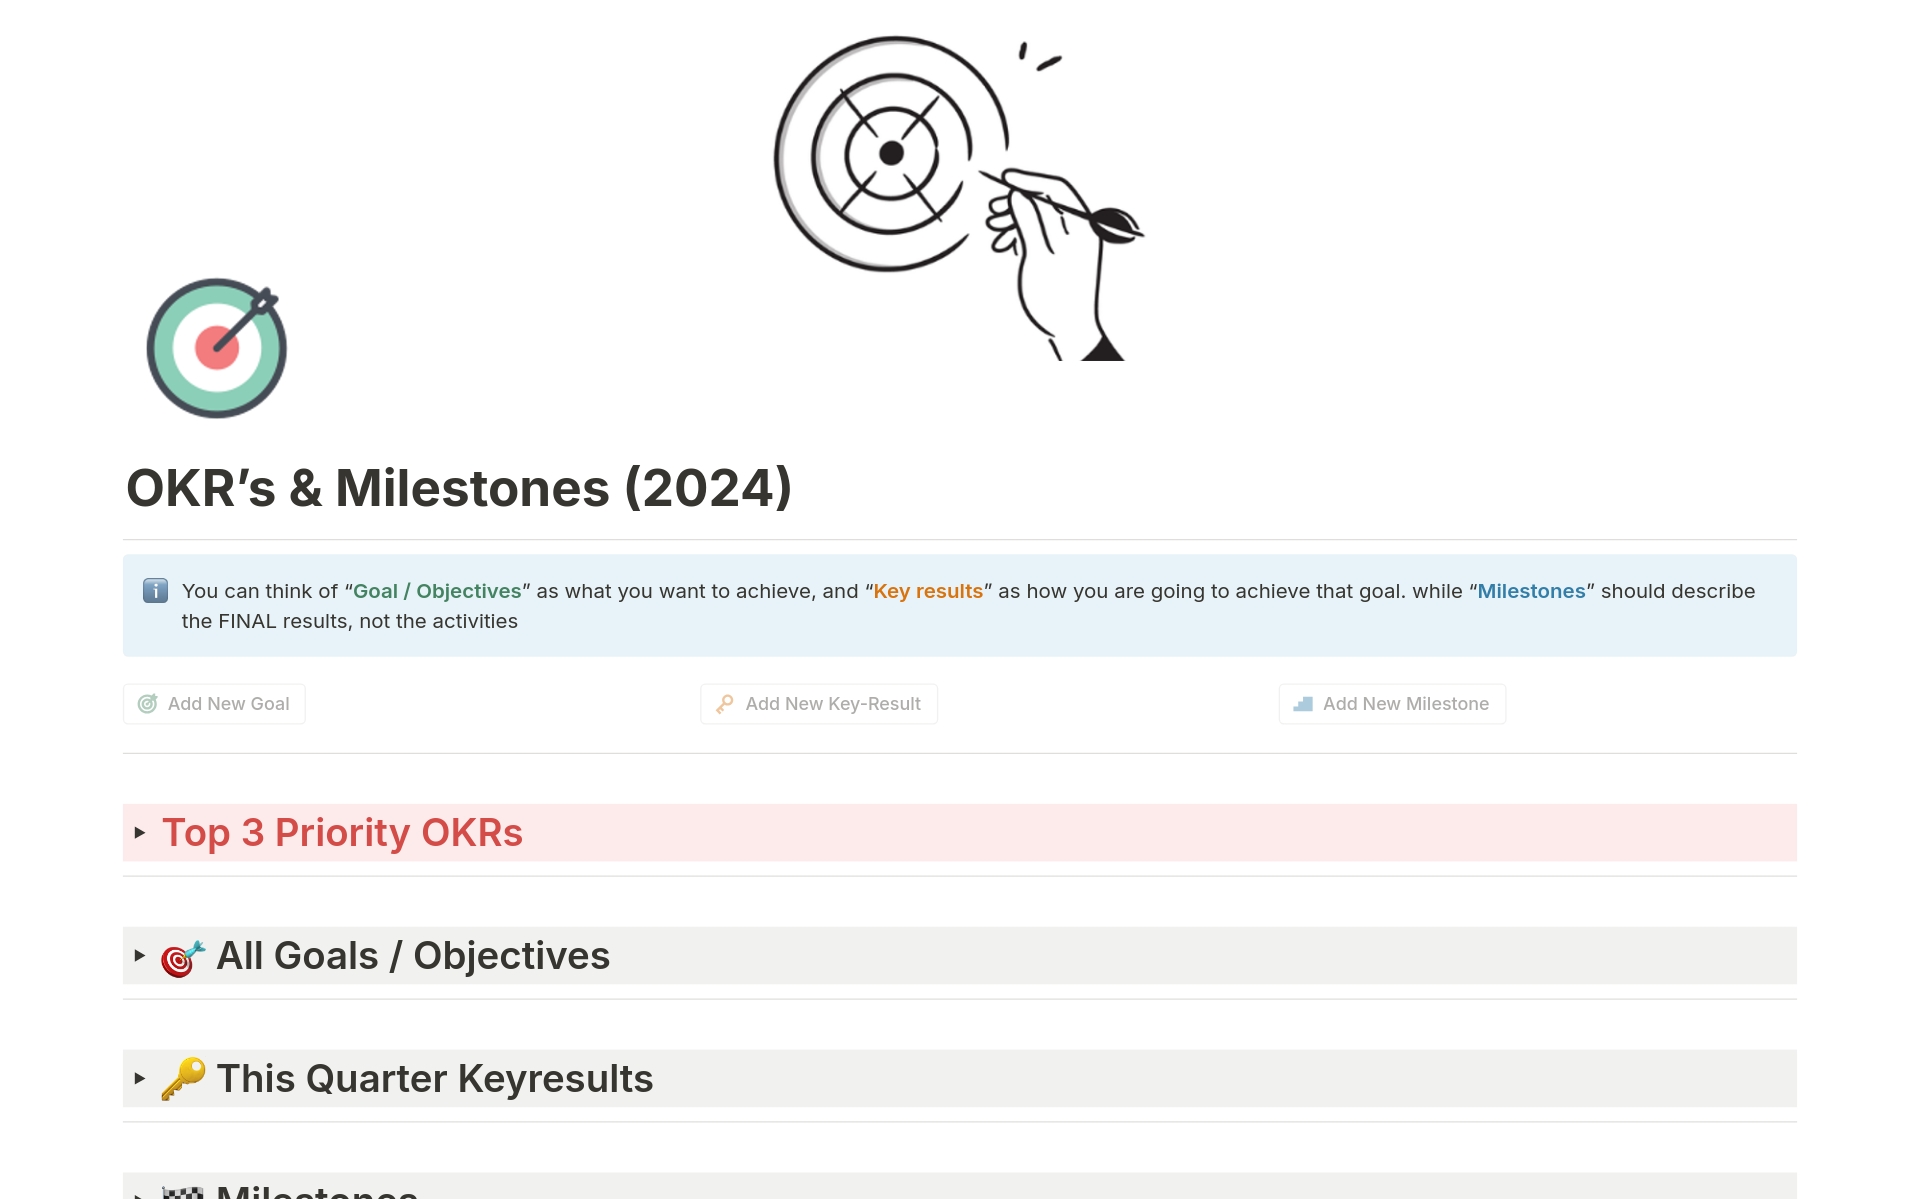 This OKR template, unlike the others, helps you set goals for this month, this quarter, and all your big goals. You can track how well you're doing with key results overview, and see important milestones along the way. It's like a map that helps you reach your goals!